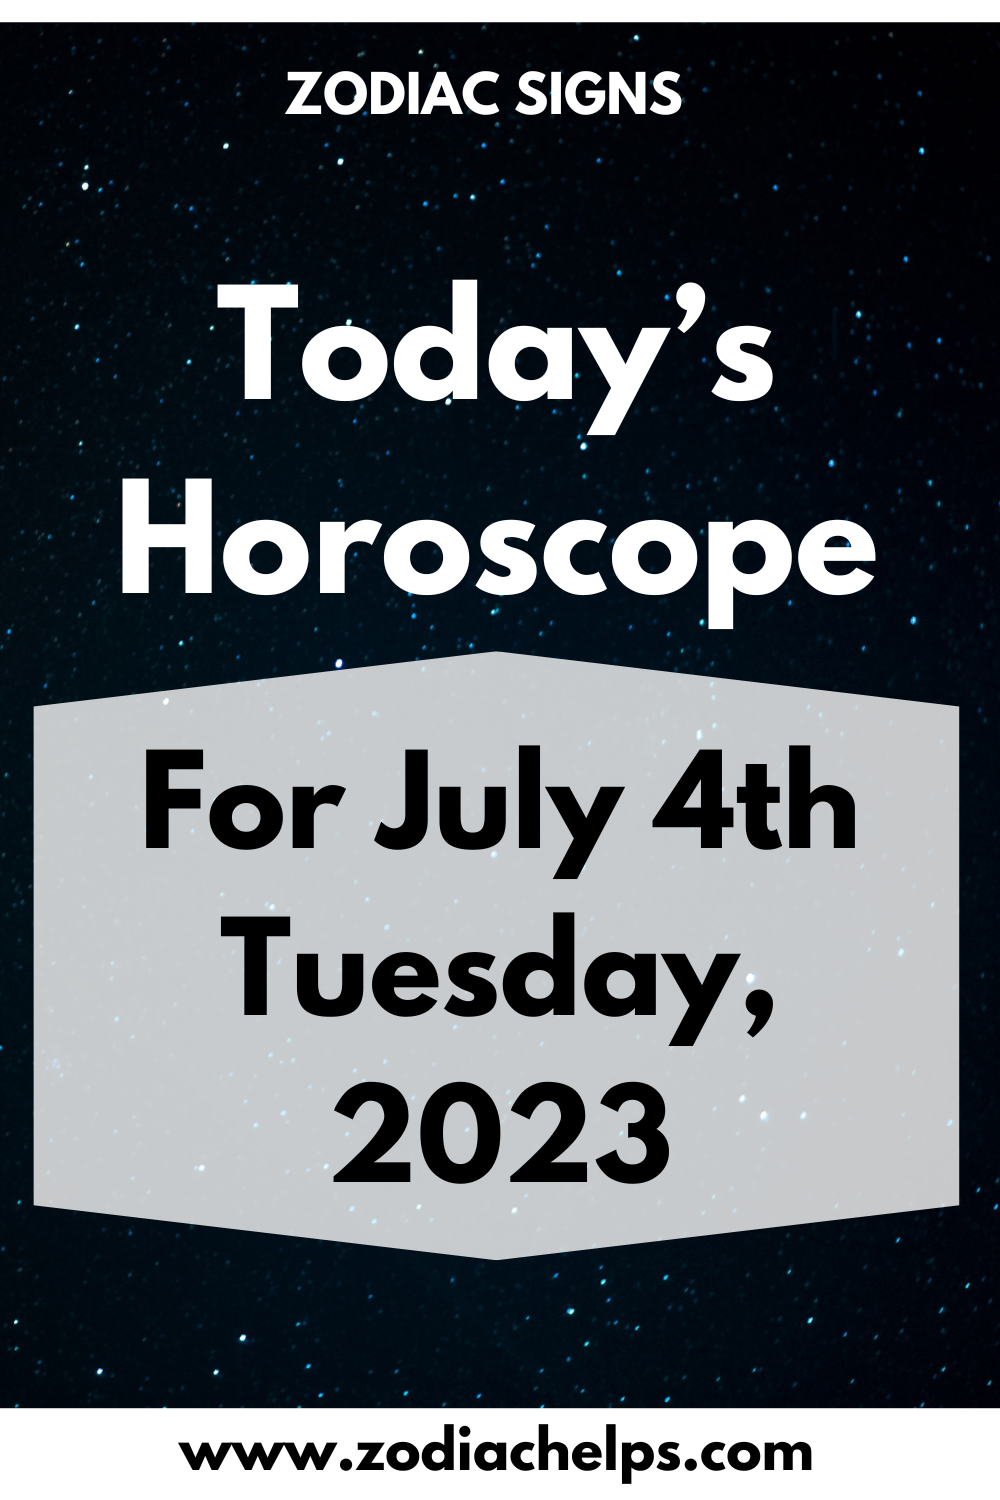 Today’s Horoscope for July 4th Tuesday, 2023